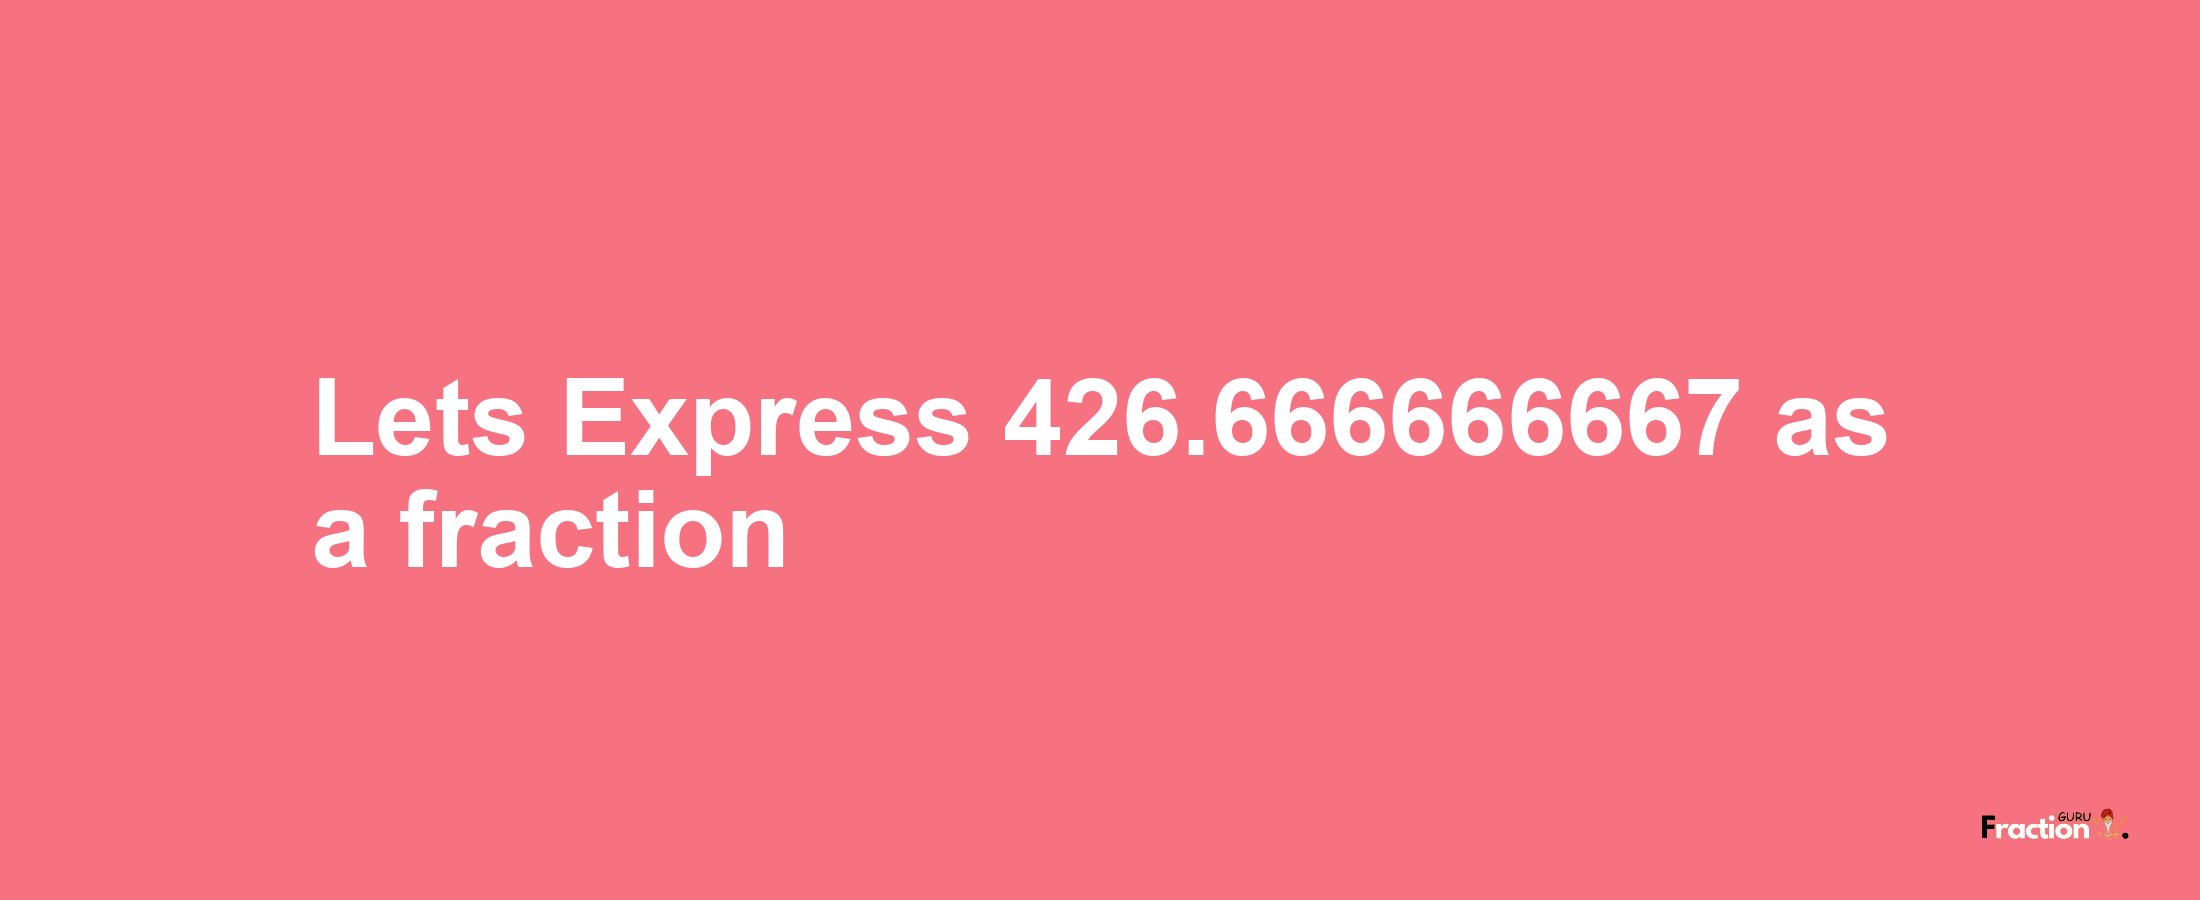 Lets Express 426.666666667 as afraction